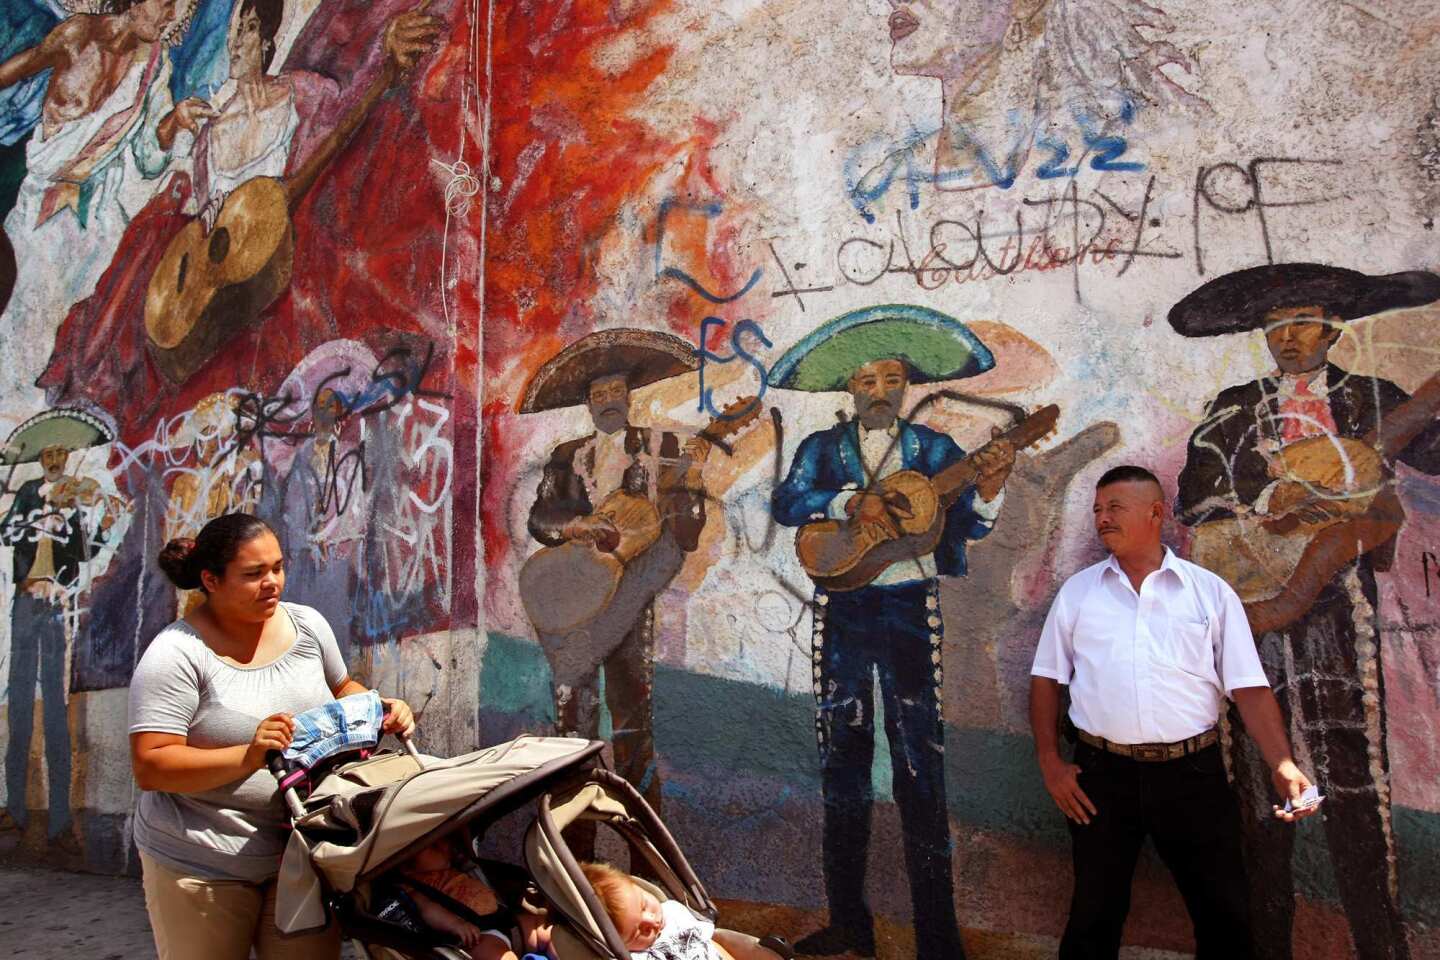 At Mariachi Plaza in Boyle Heights, mariachi Refugio Pena waits next to a defaced mural featuring mariachis to hand out business cards to possible clients. Pena plays with the mariachi group Internacional Varas Nayarit.